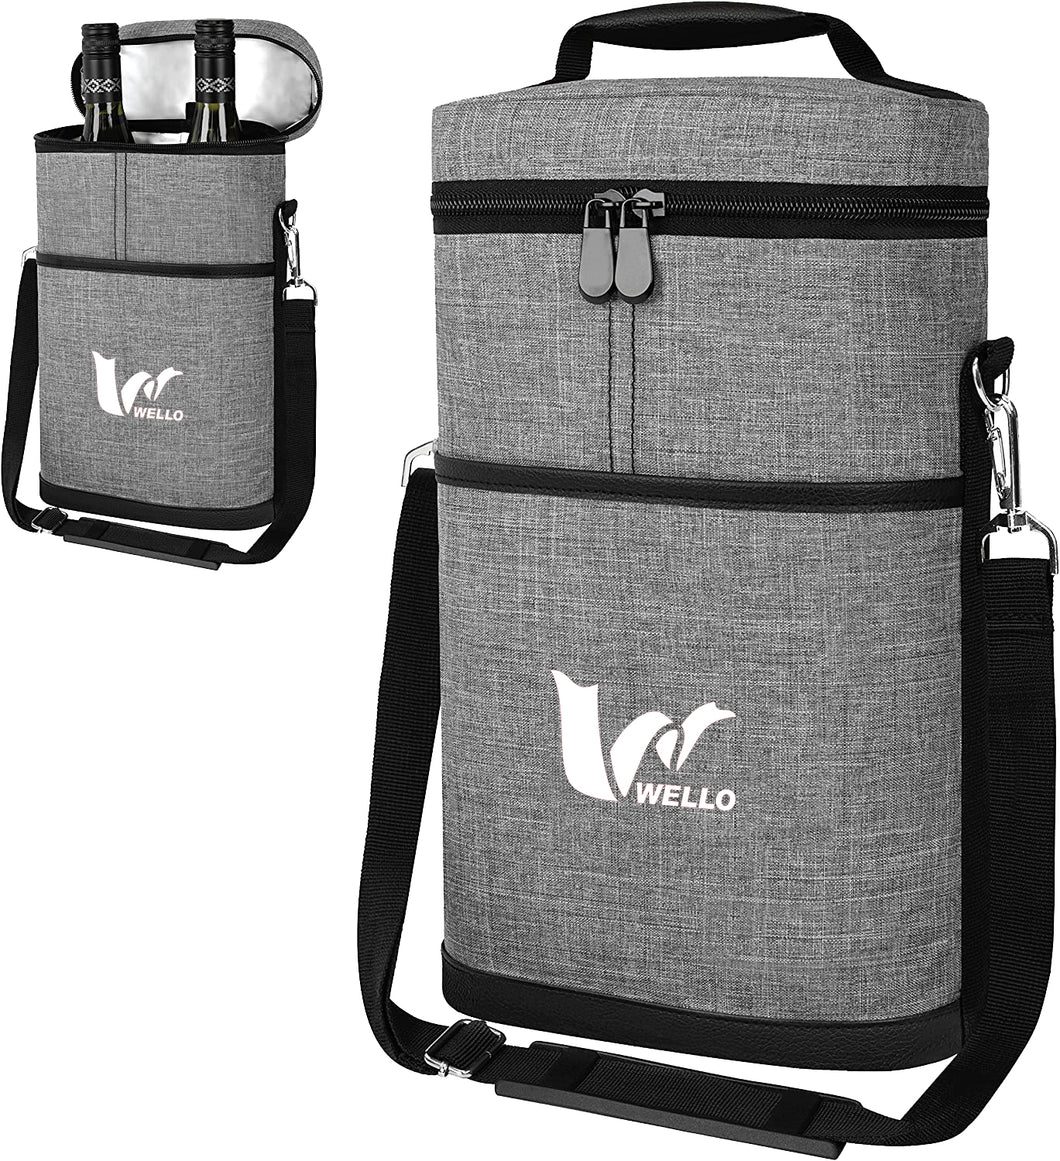 2 Bottle Insulated Wine Tote Bag